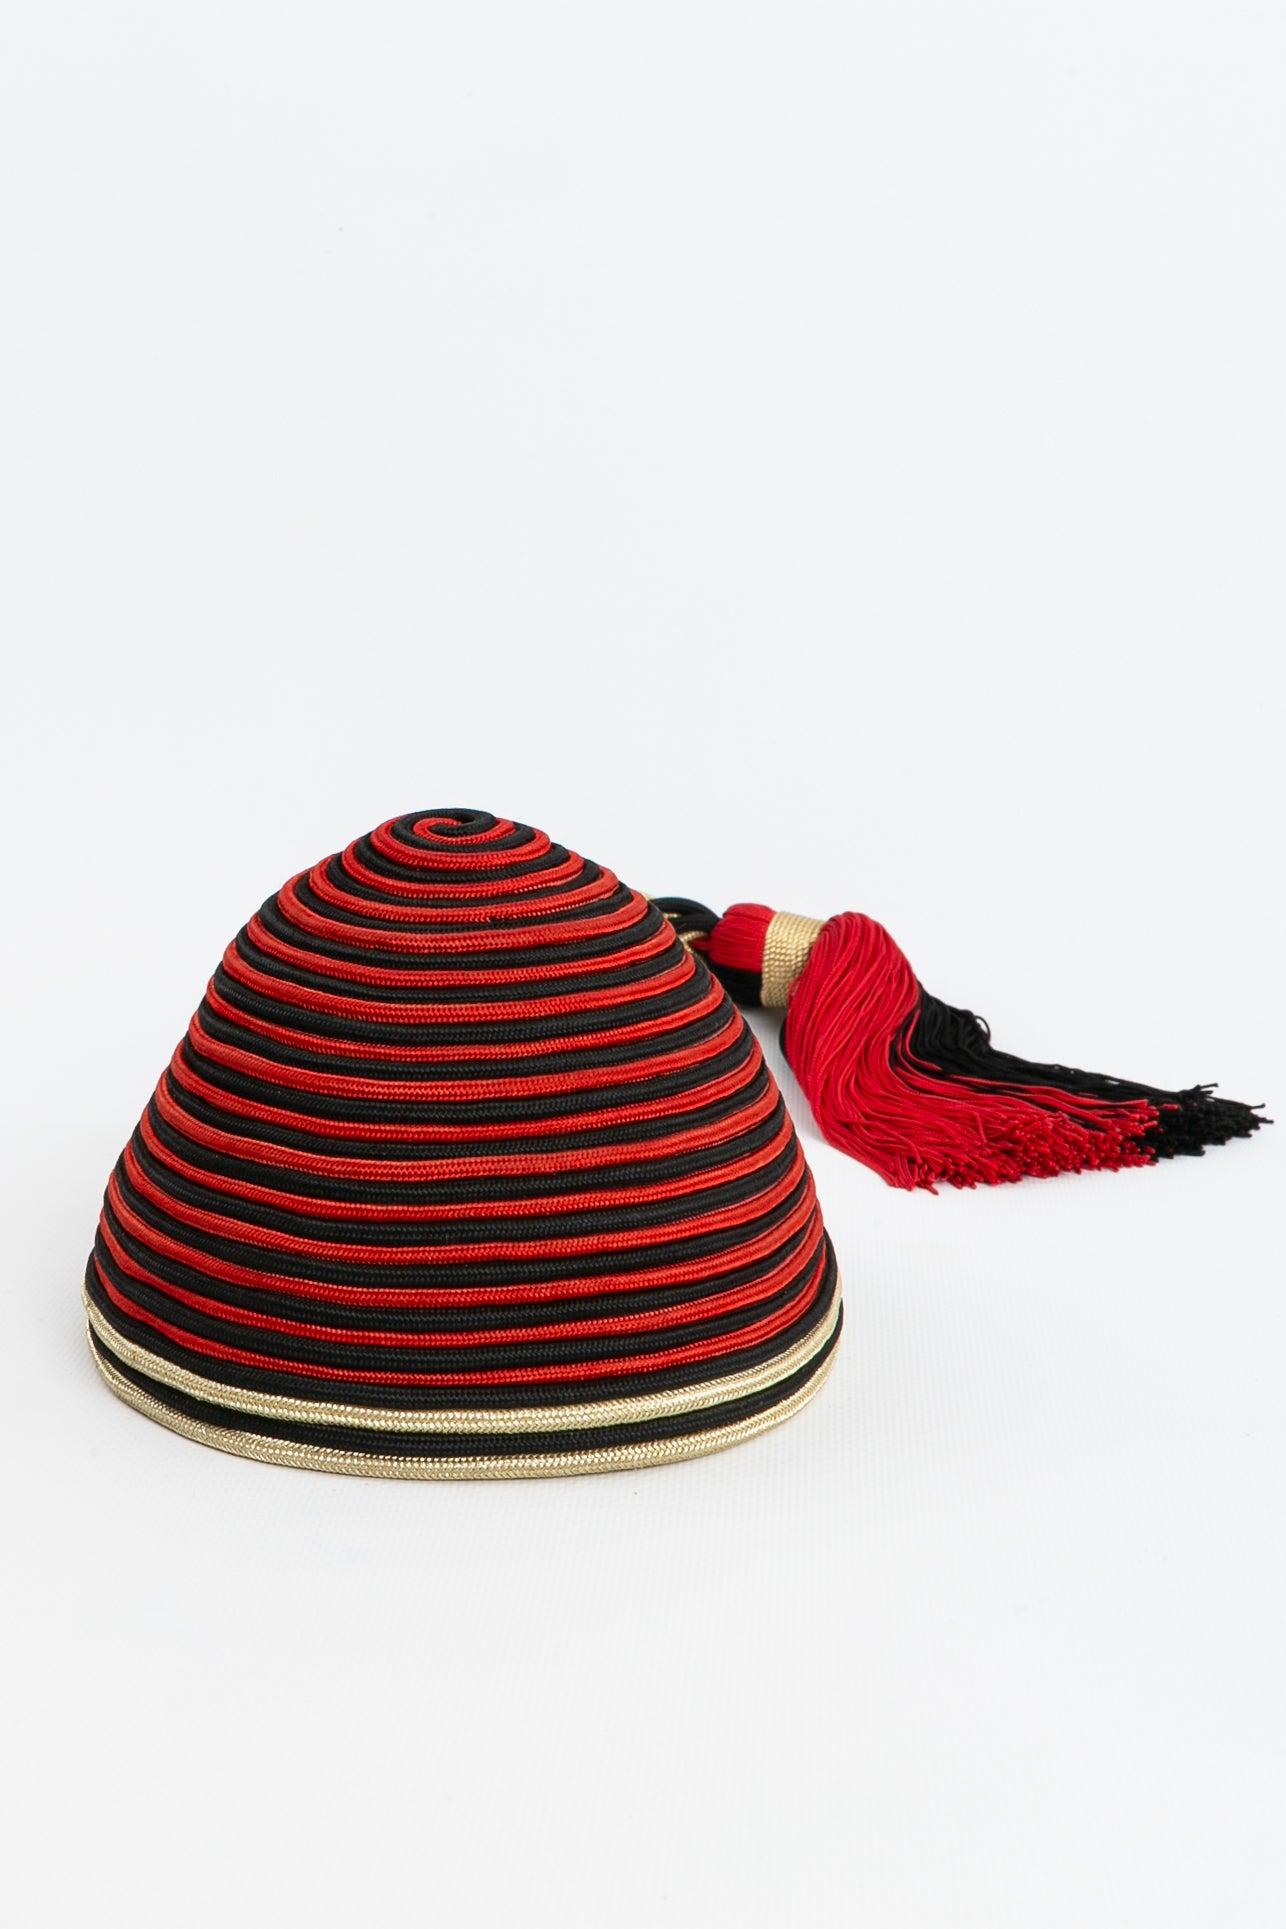 Yves Saint Laurent Fashion Show Hat in Red, Black and Gold Trimmings For Sale 2